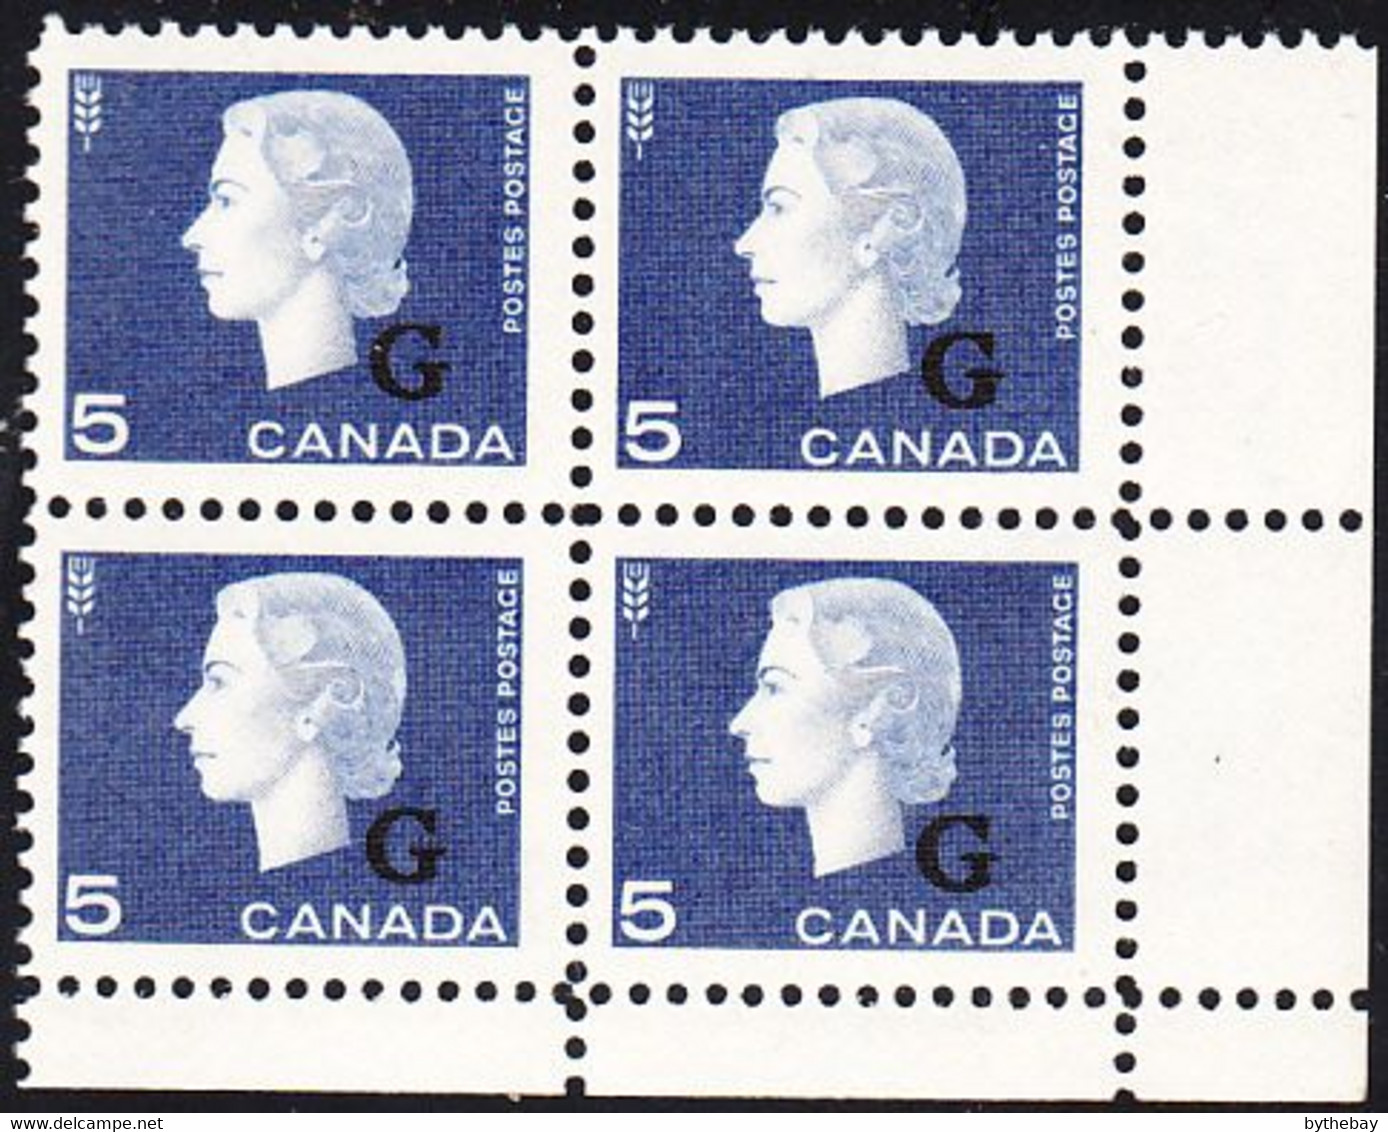 Canada MNH Scott #O49 5c Cameo With 'G' Overprint Lower Right Plate Block (blank) - Overprinted